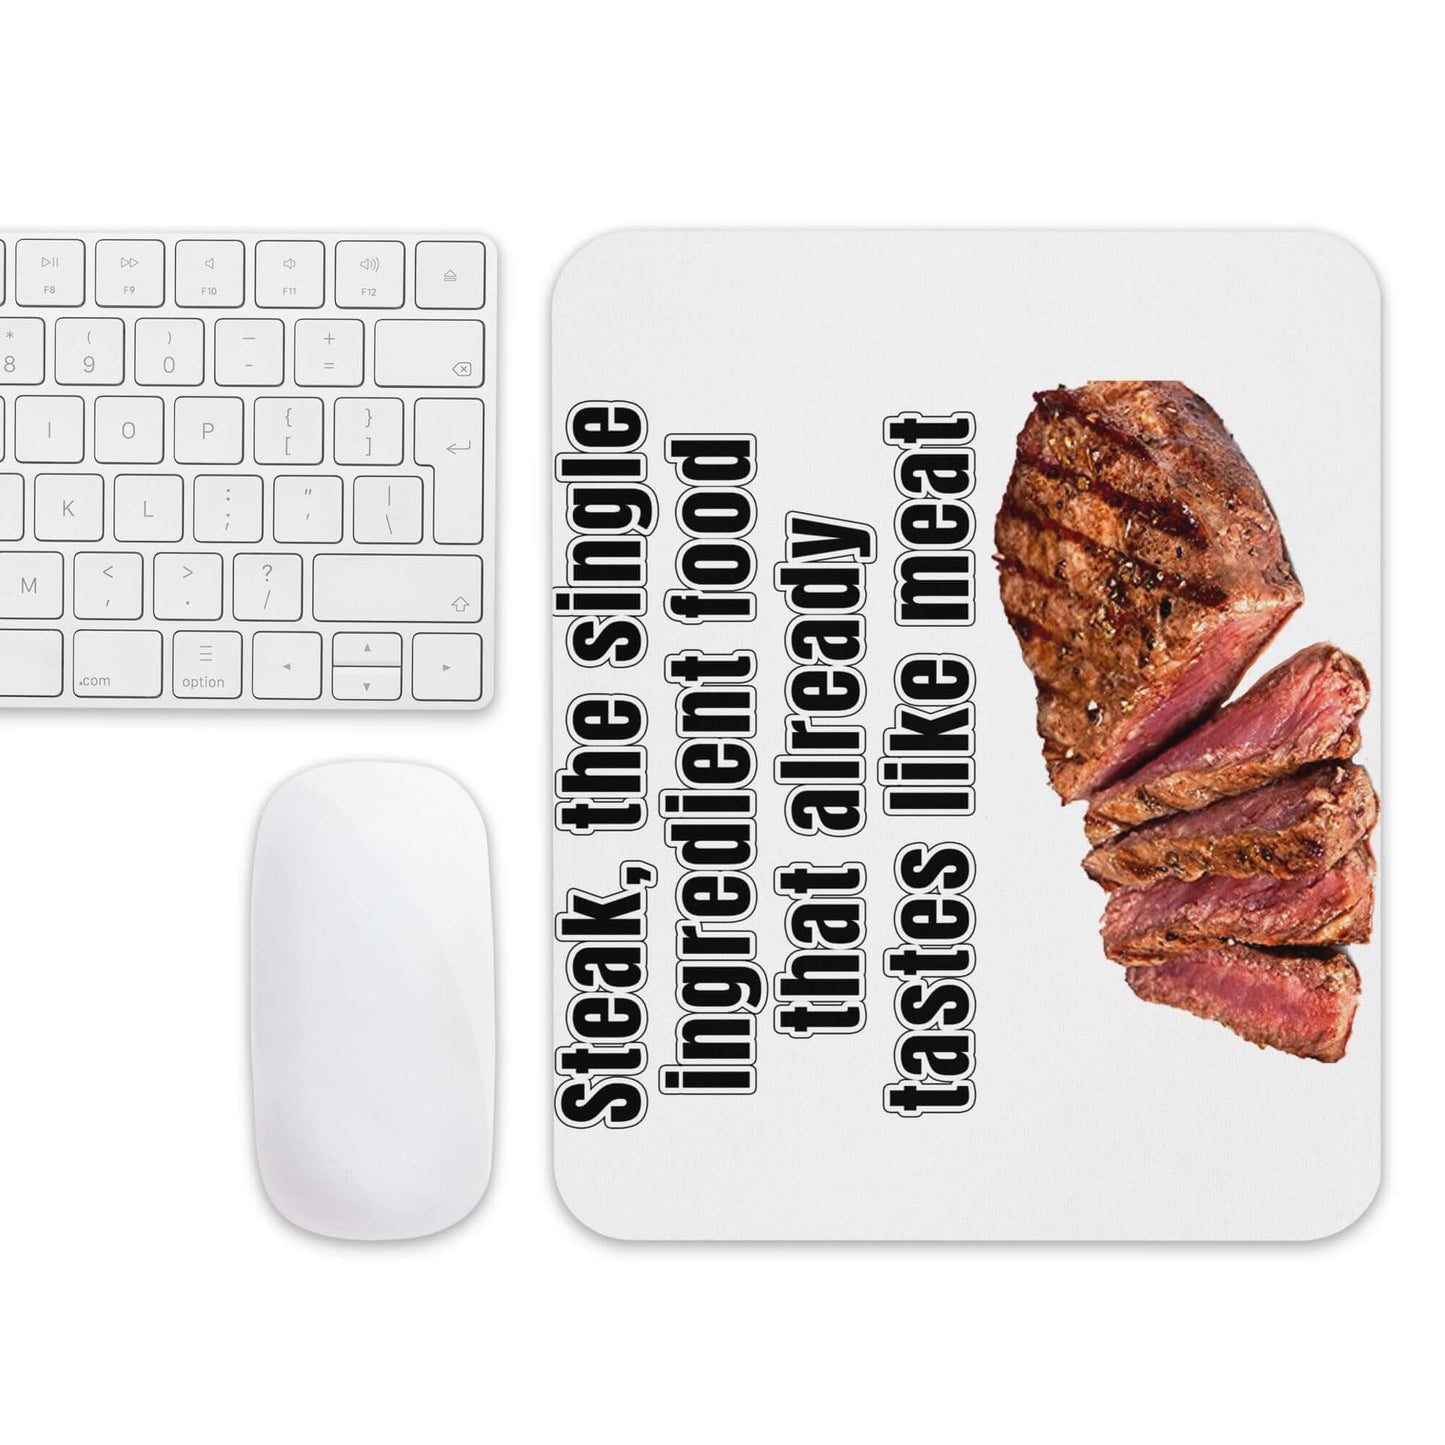 Steak, the single ingredient food that already tastes like meat - Mouse pad - Horrible Designs